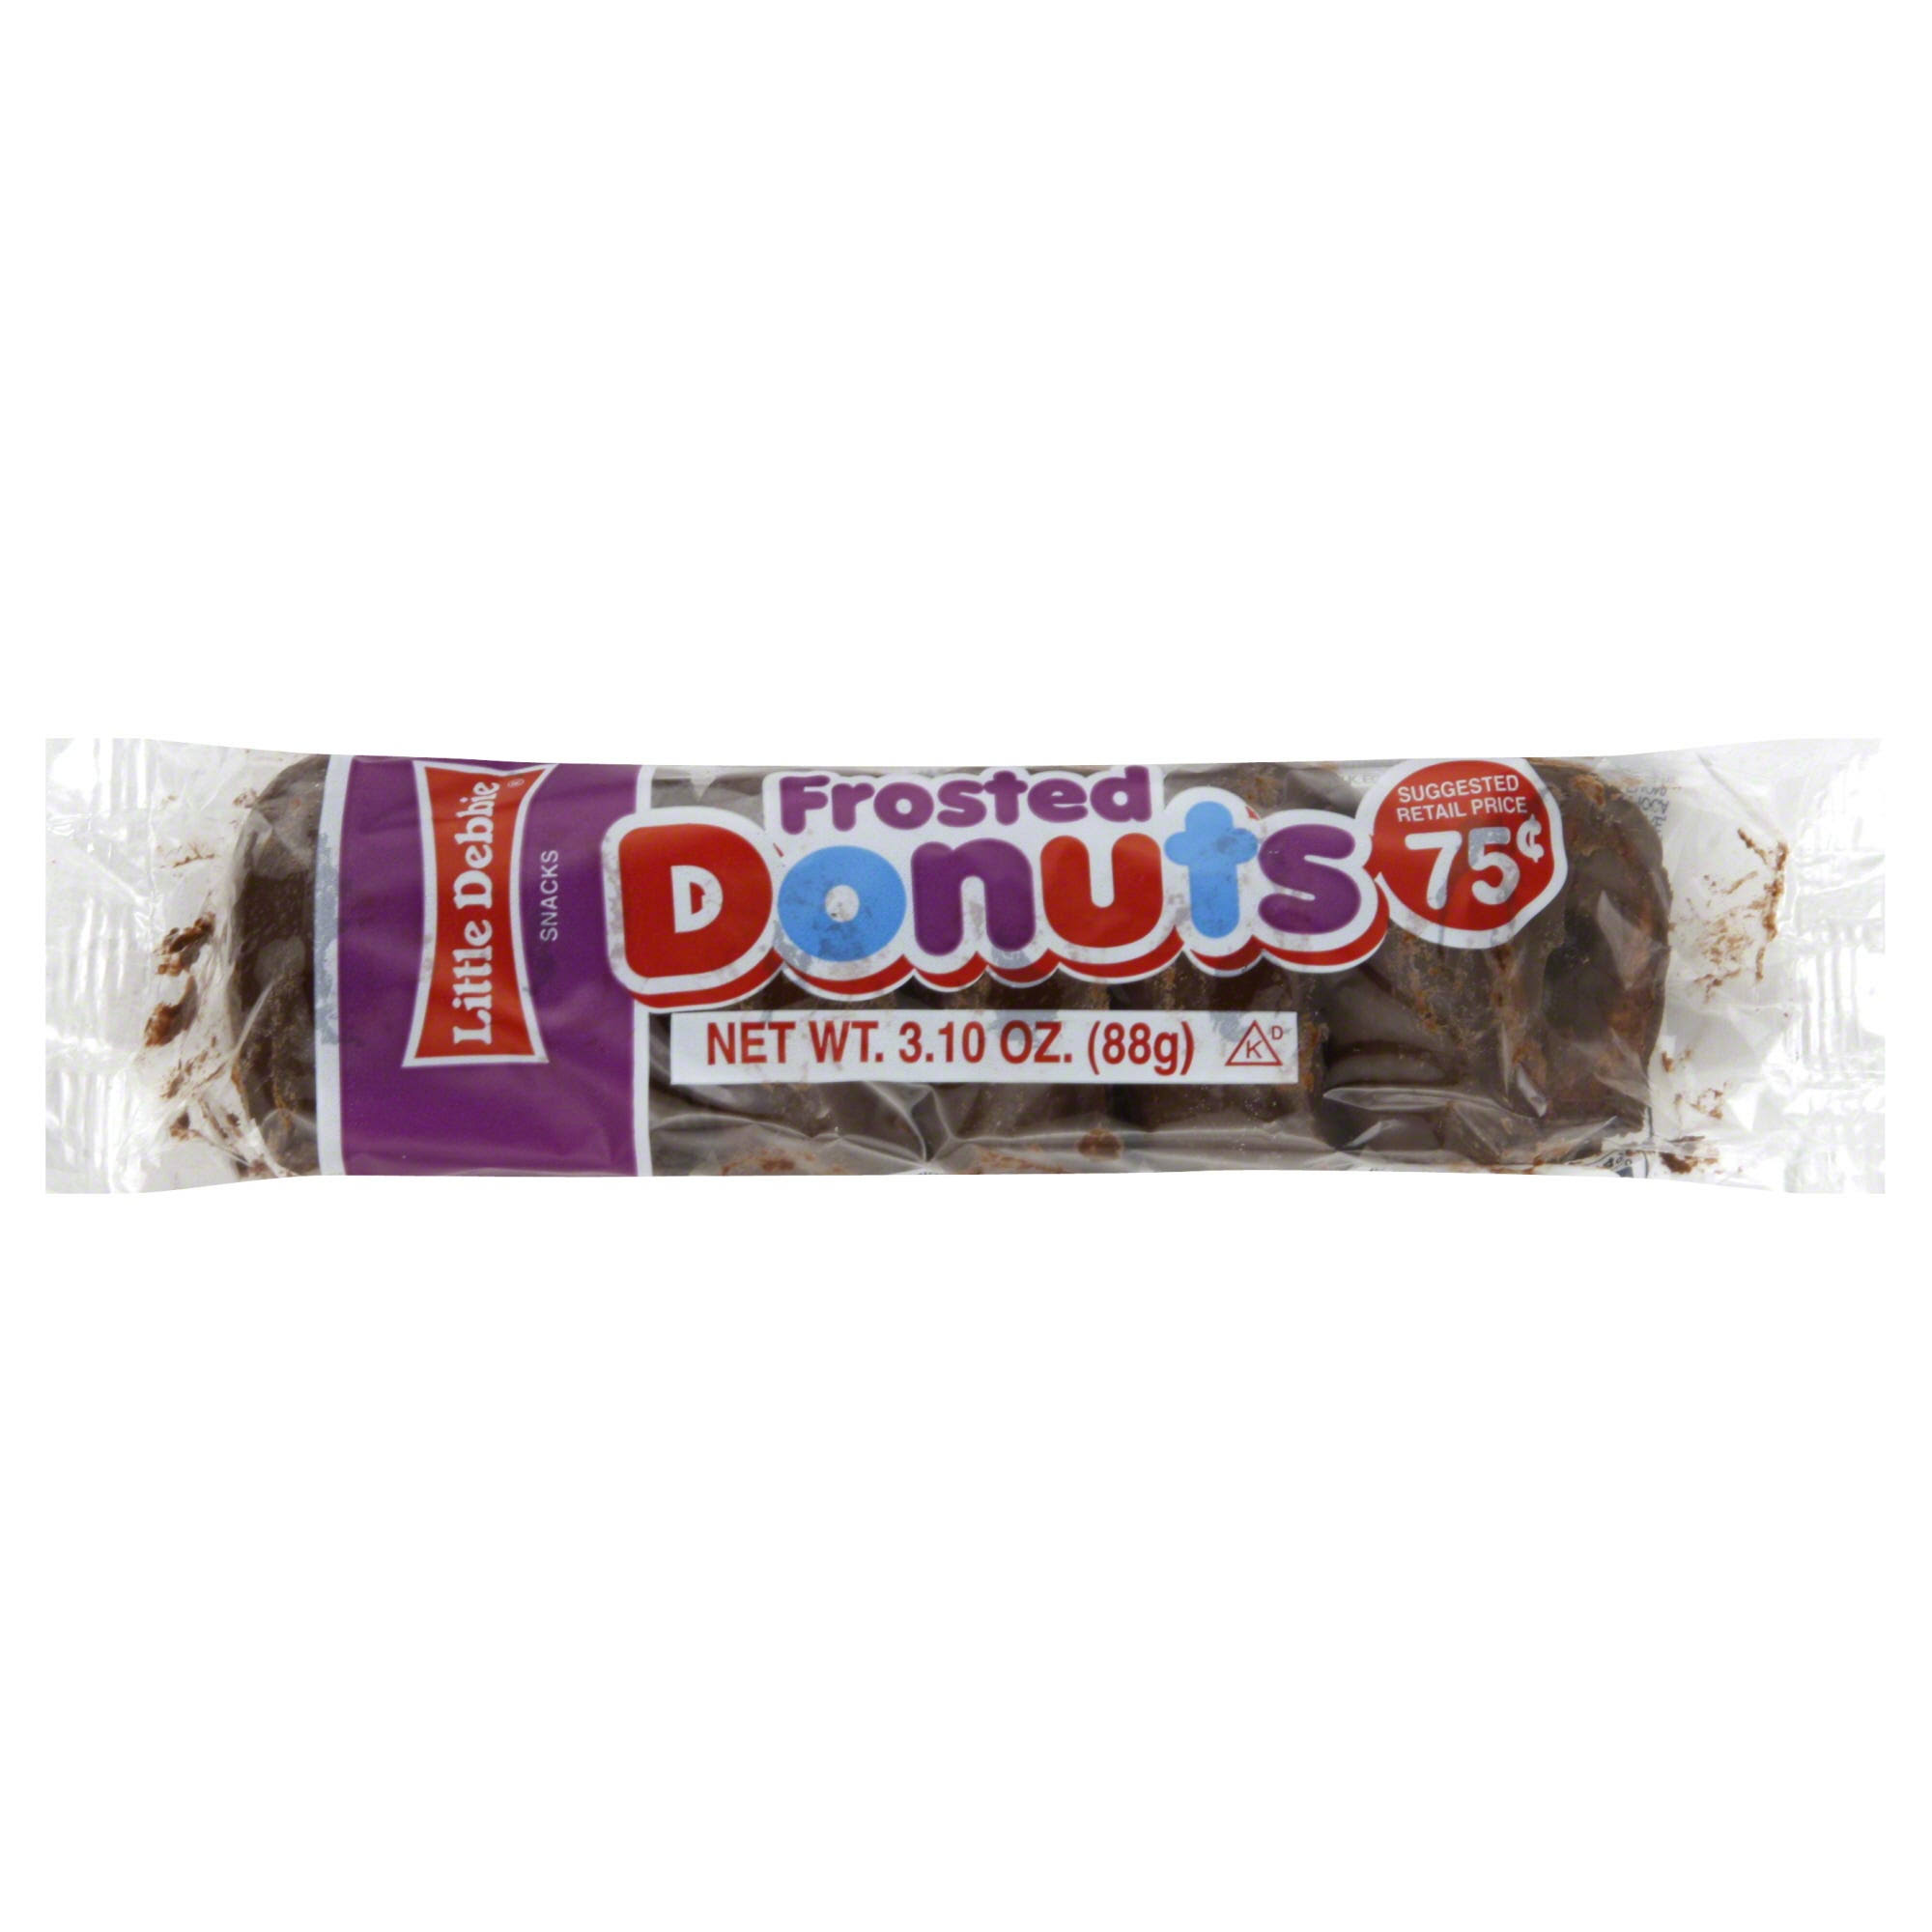 Little Debbie Frosted Donuts